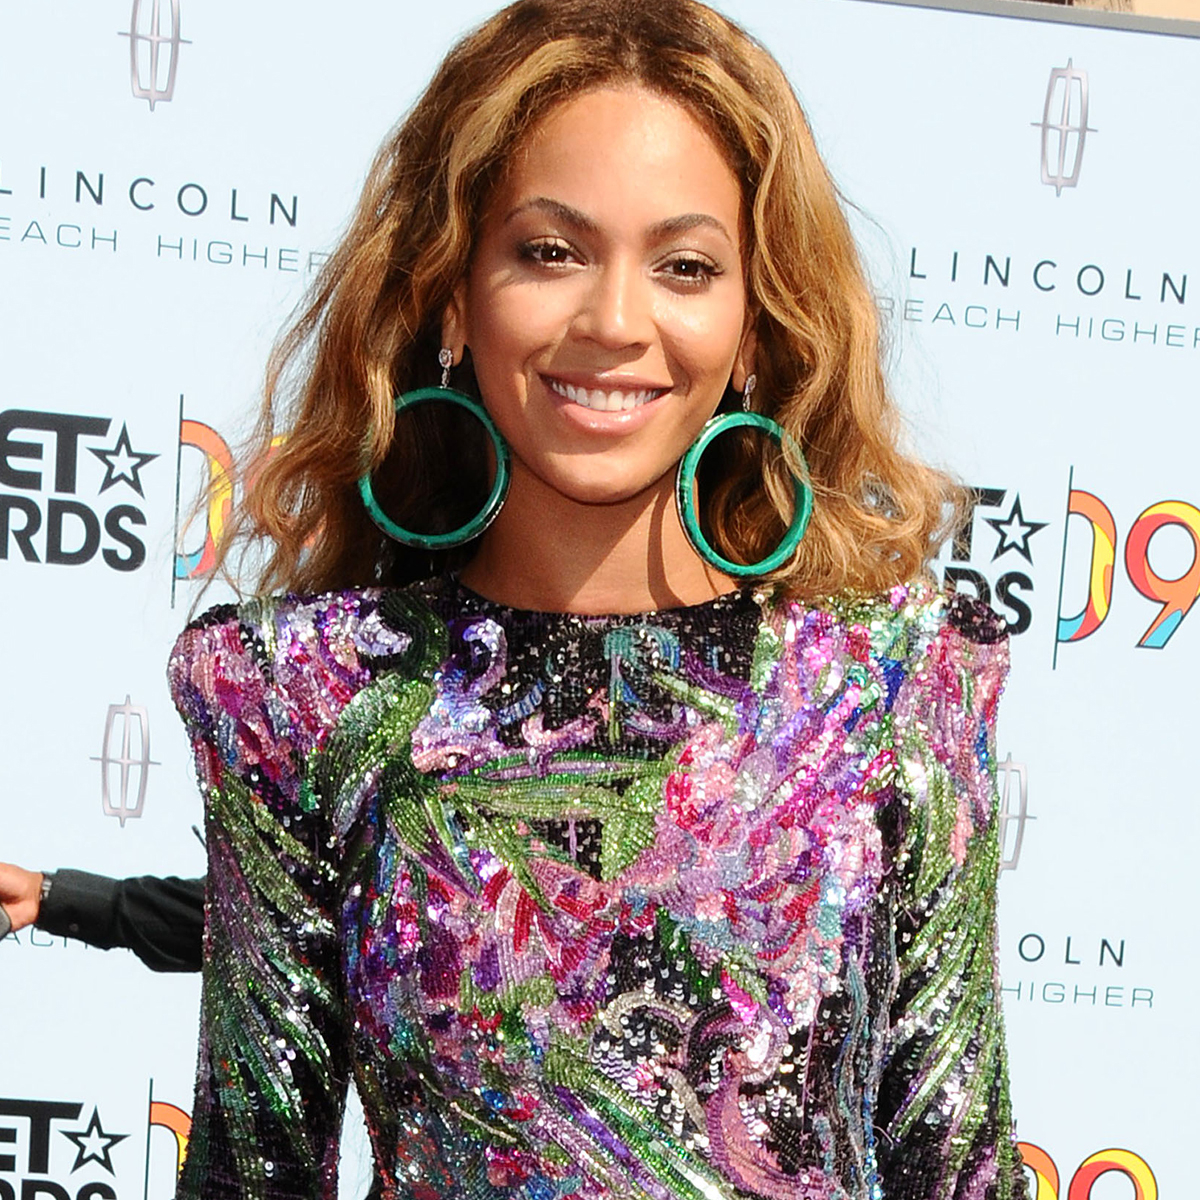 The Most Unforgettable Red Carpet Moments From BET Awards